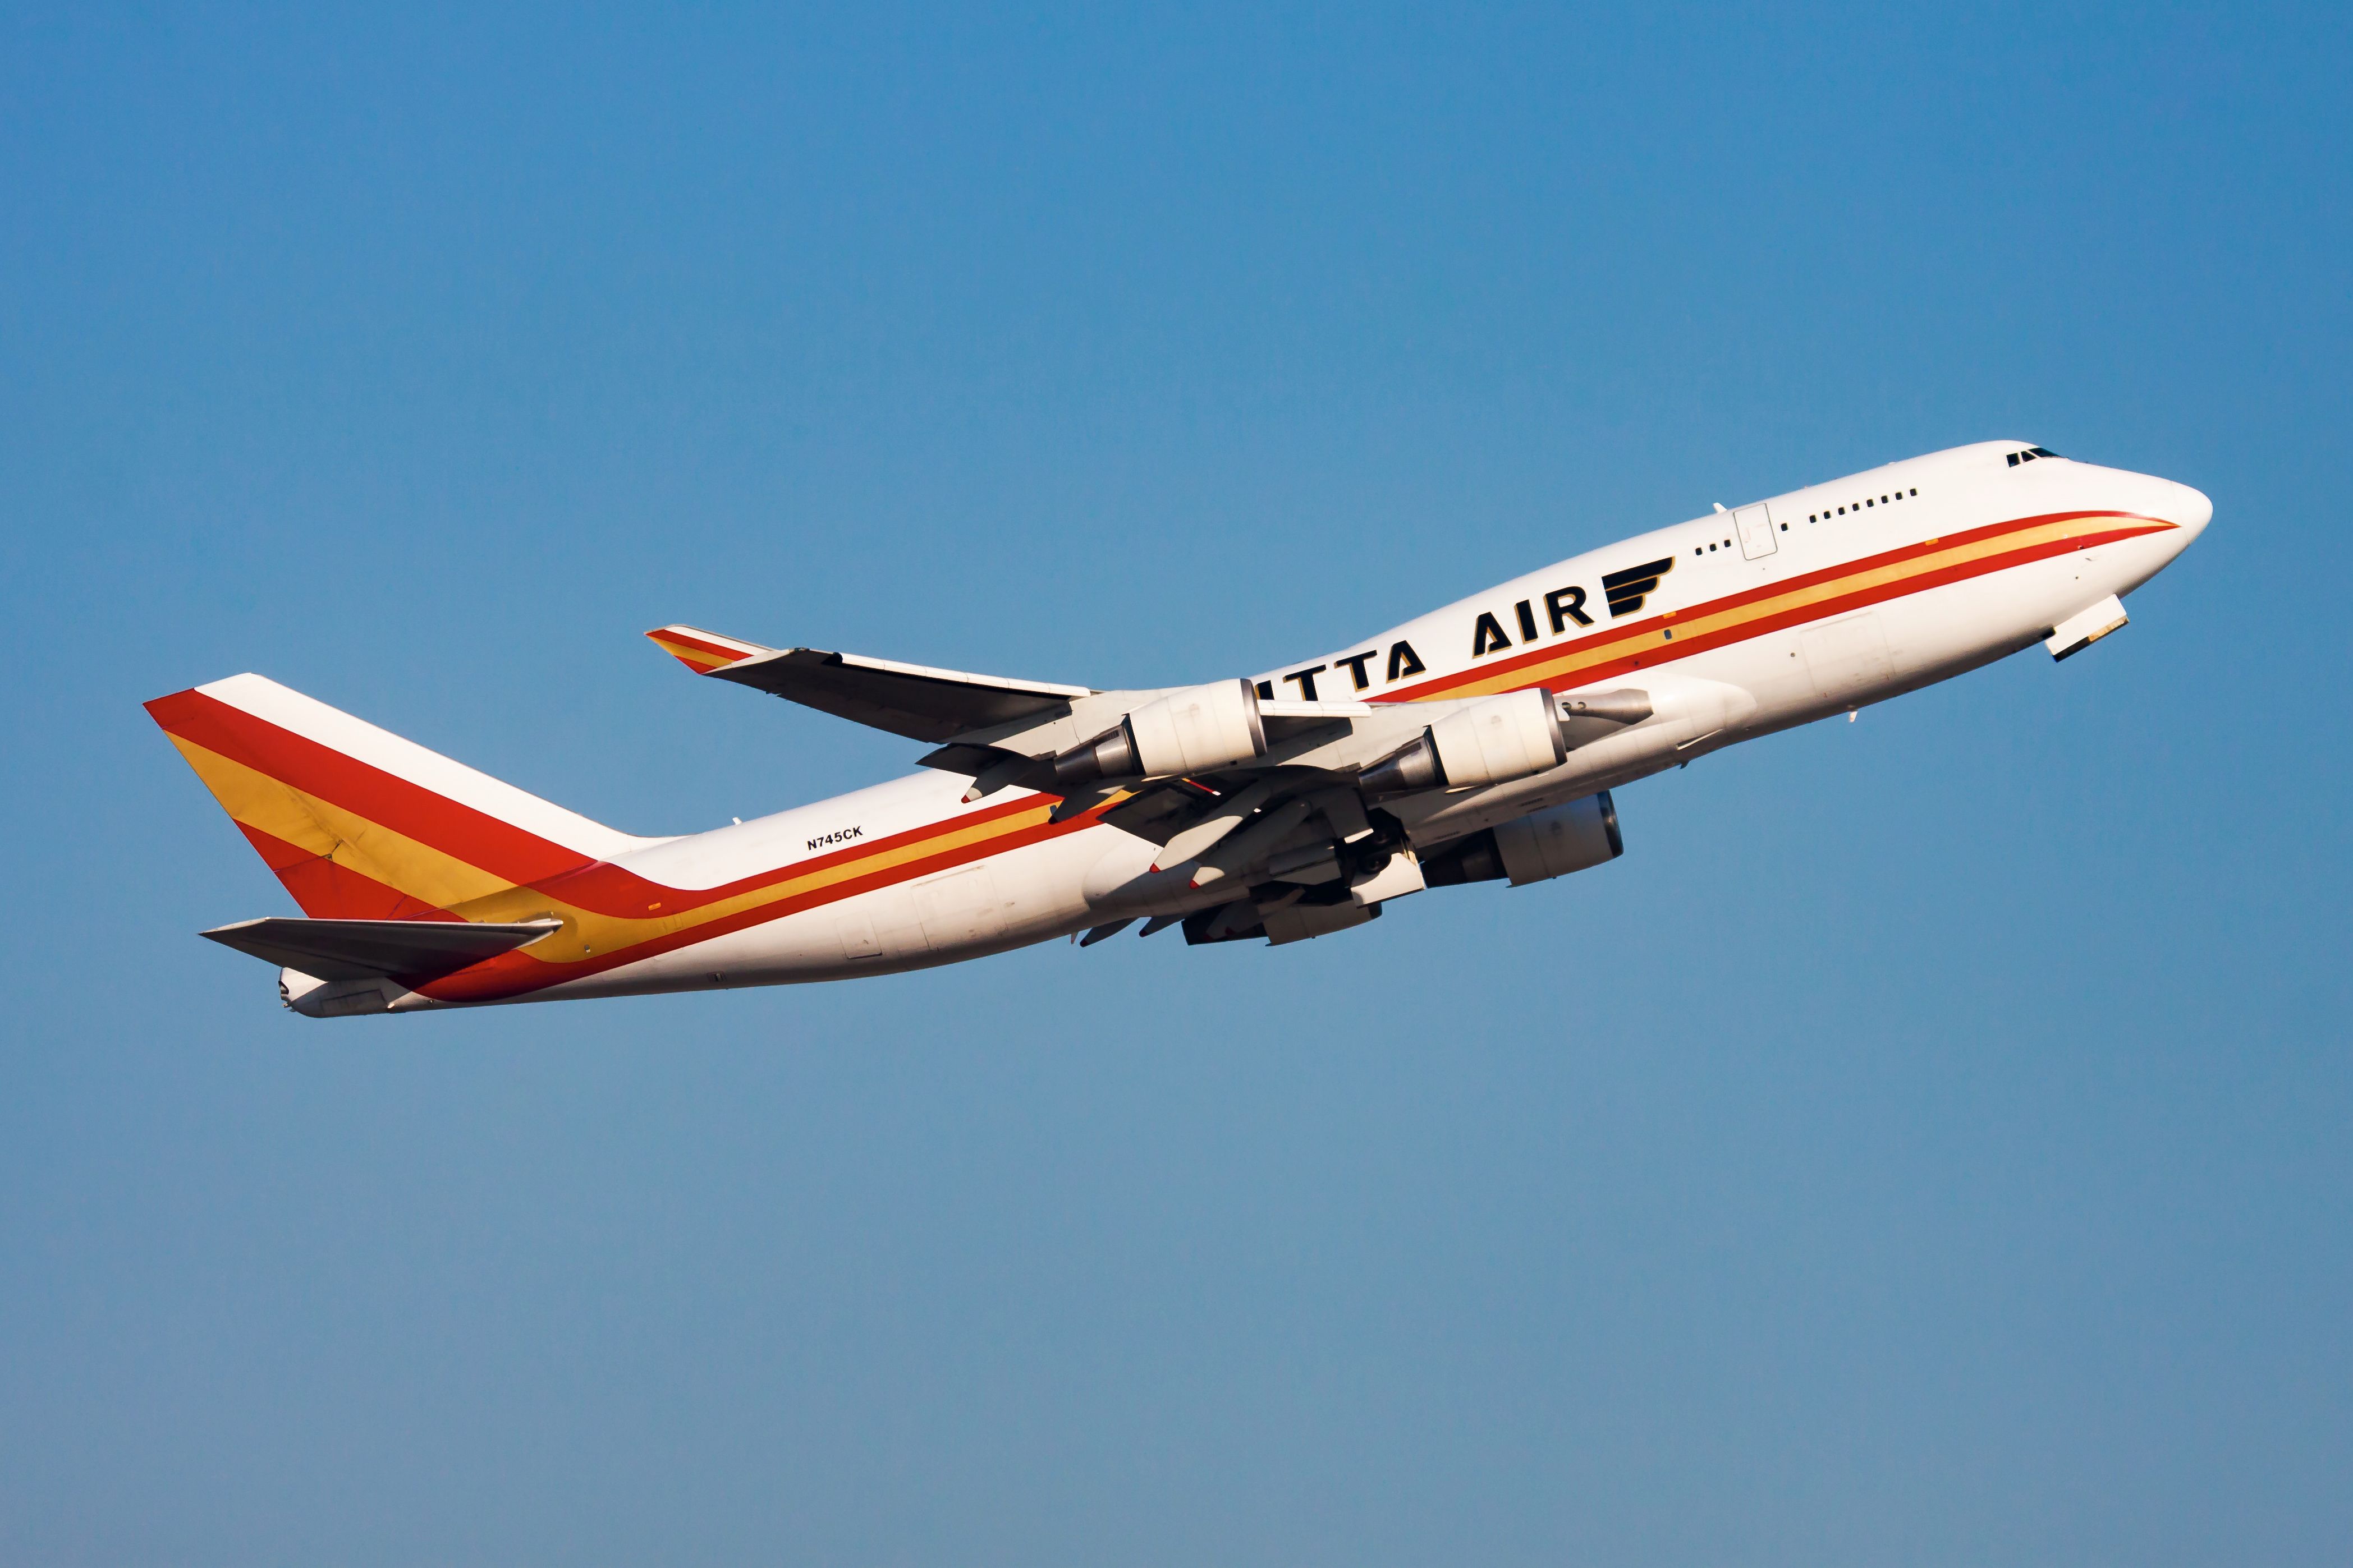 A Kalitta Air Boeing 747-400F flying in the sky.